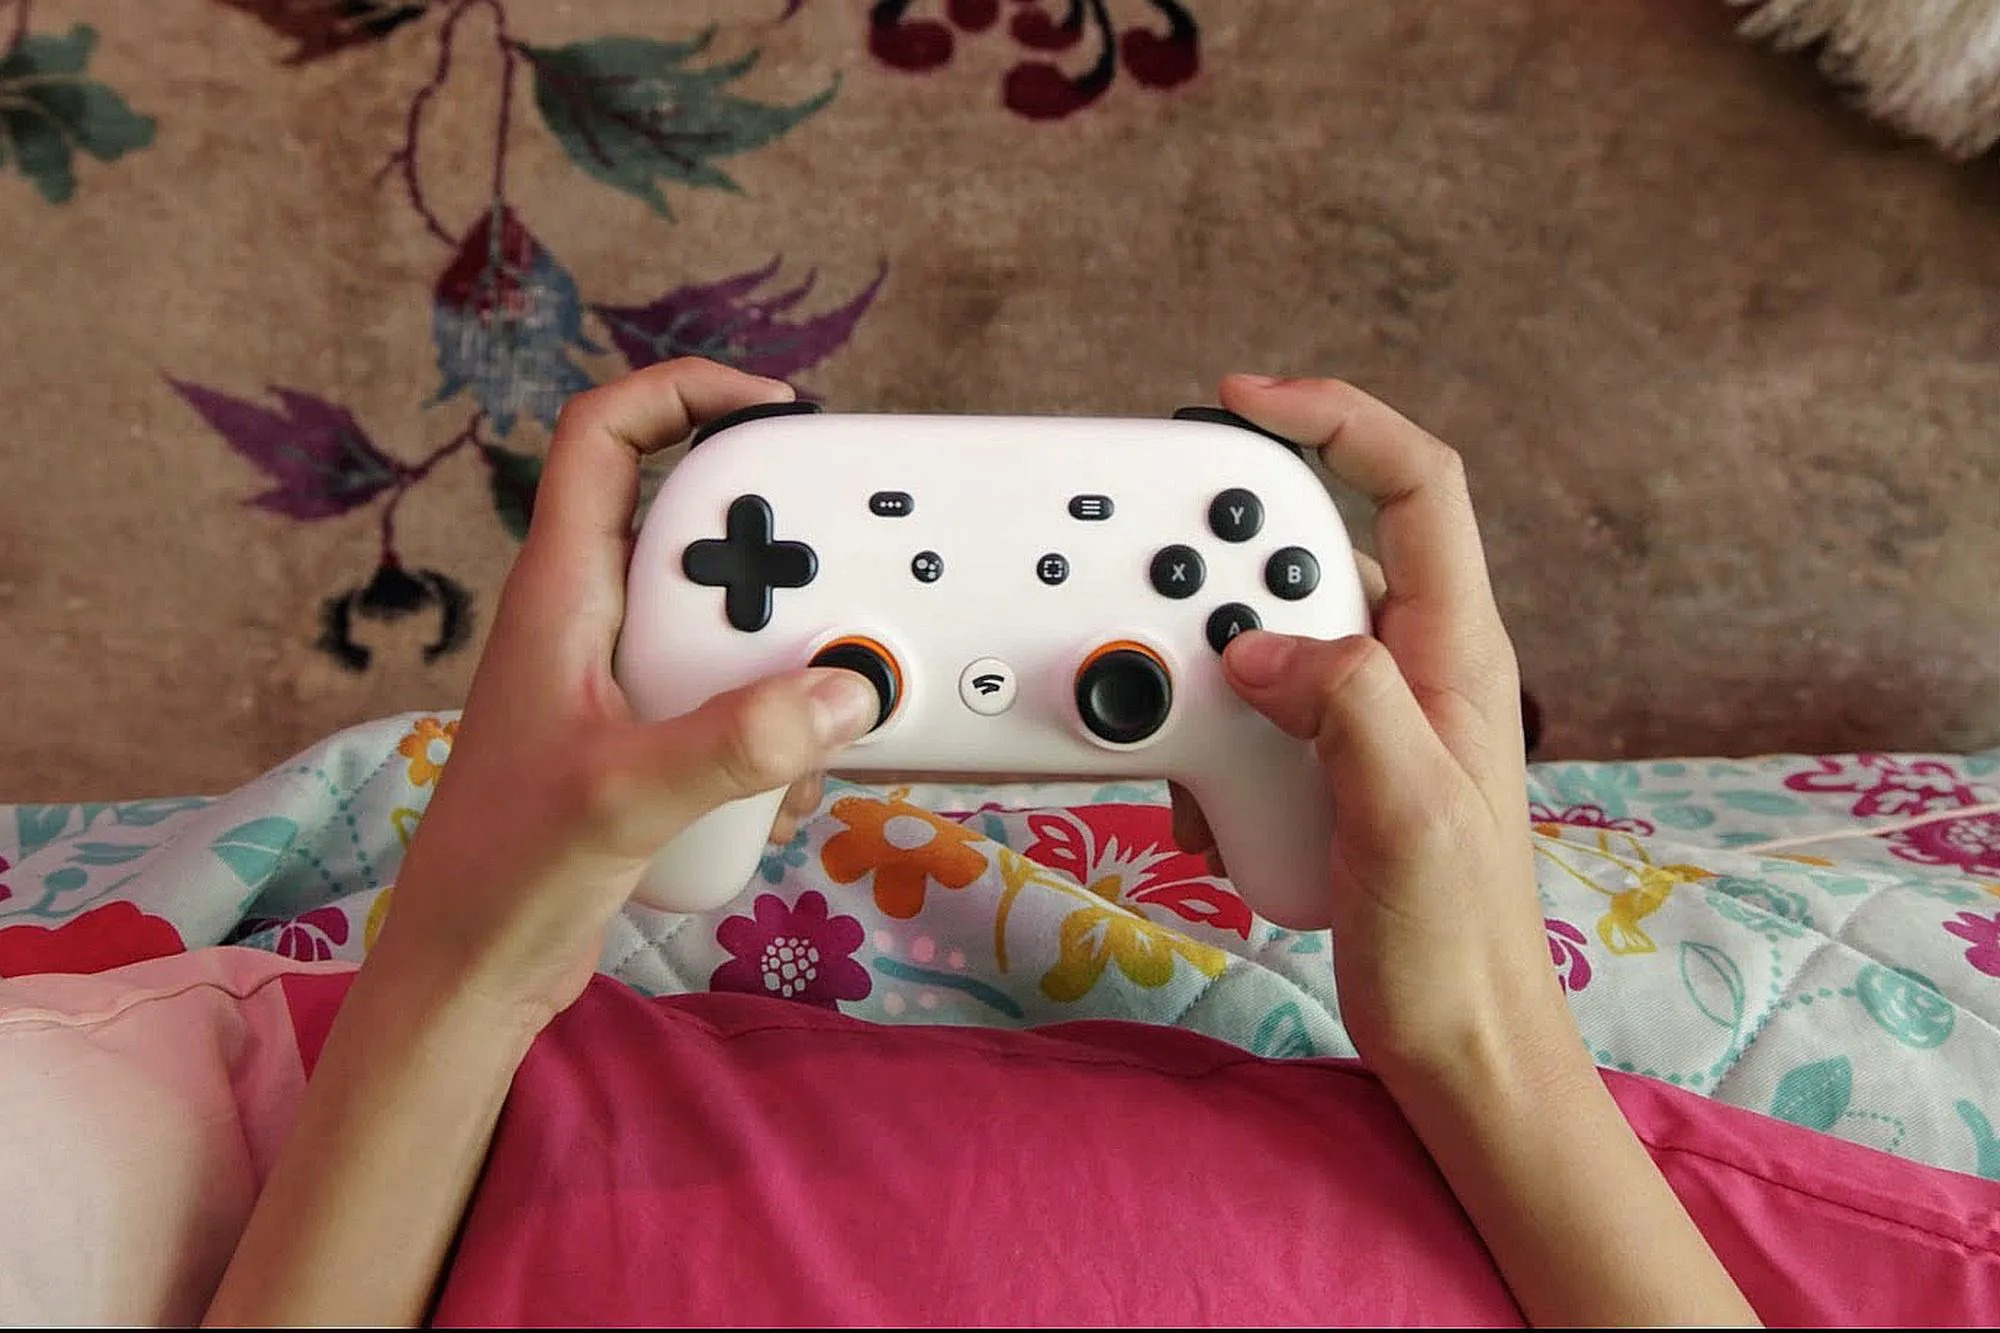 Finally for Stadia, Google’s cloud gaming service – Google